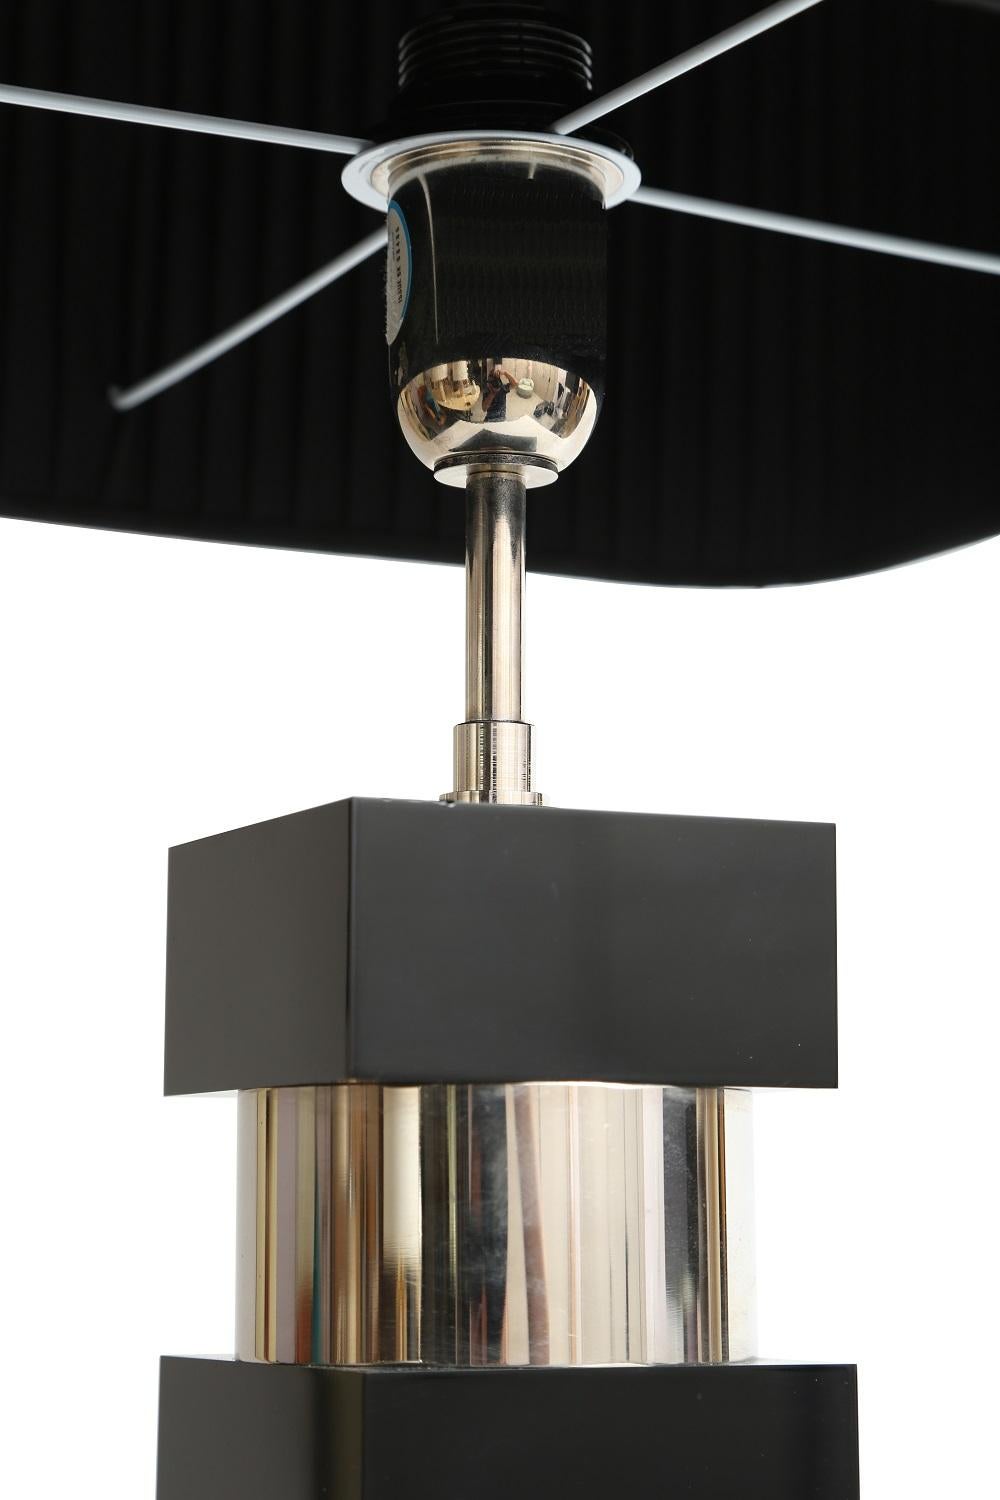 Grattacielo table Lamp by Selezioni Domus, made in Italy.

Dimensions: 
5